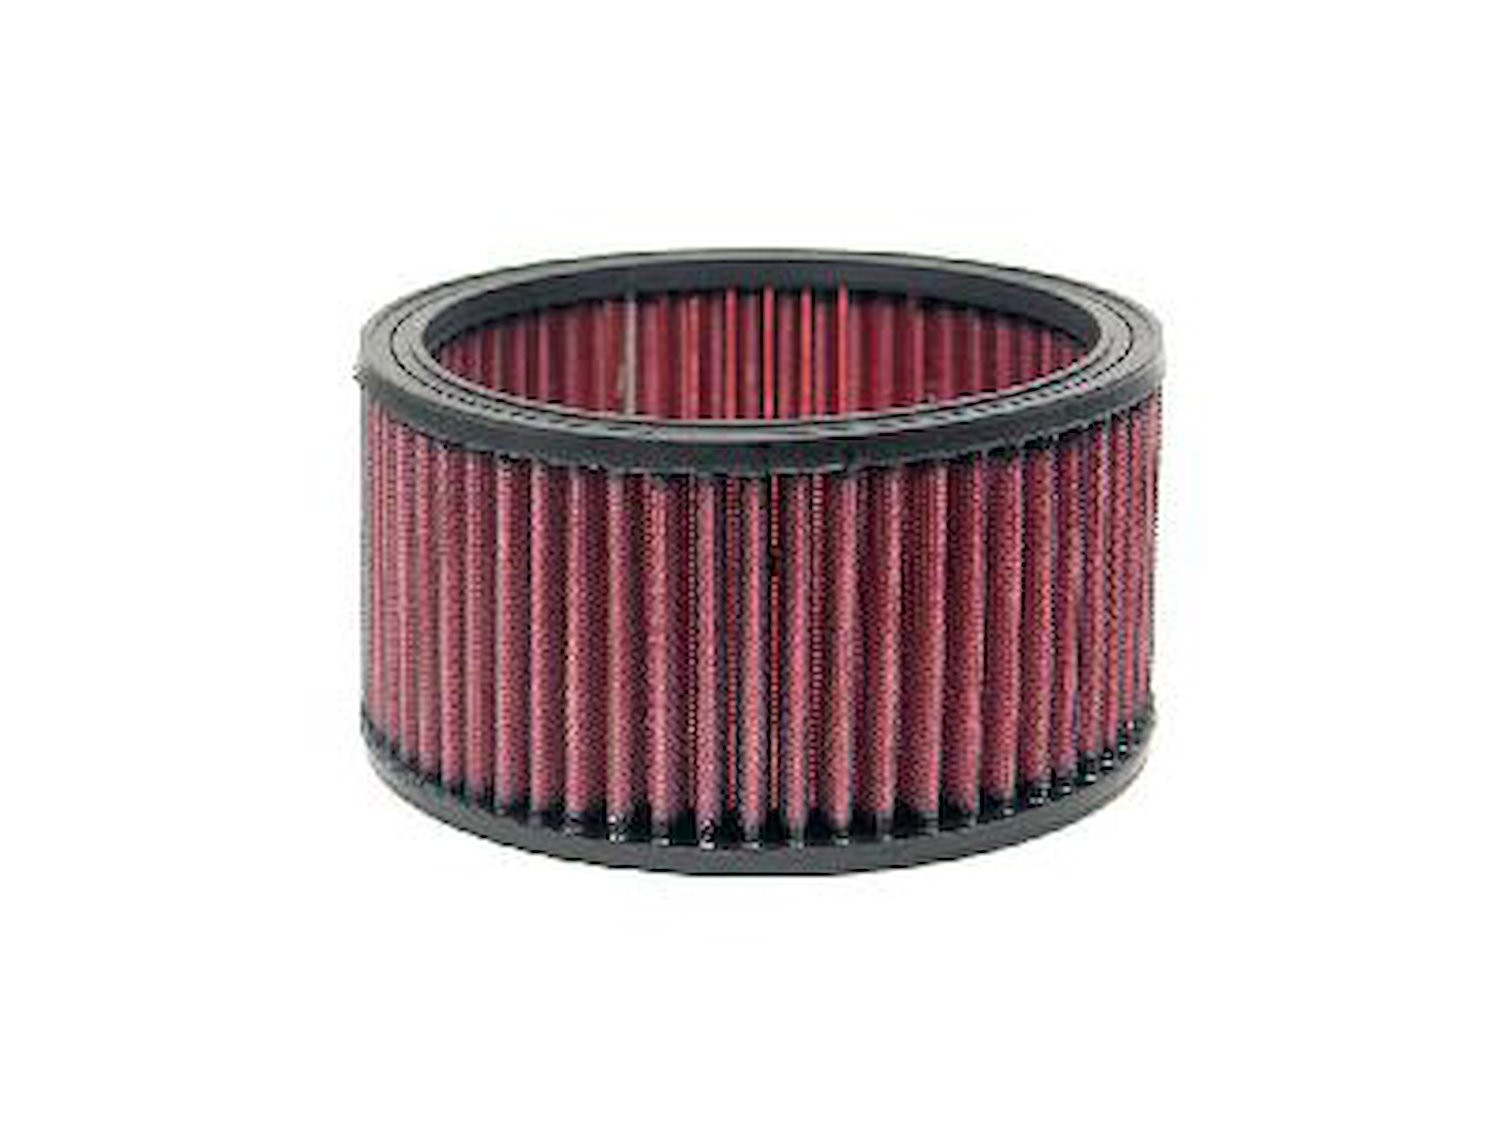 Air Filters 5.875"X3.25" ROUND